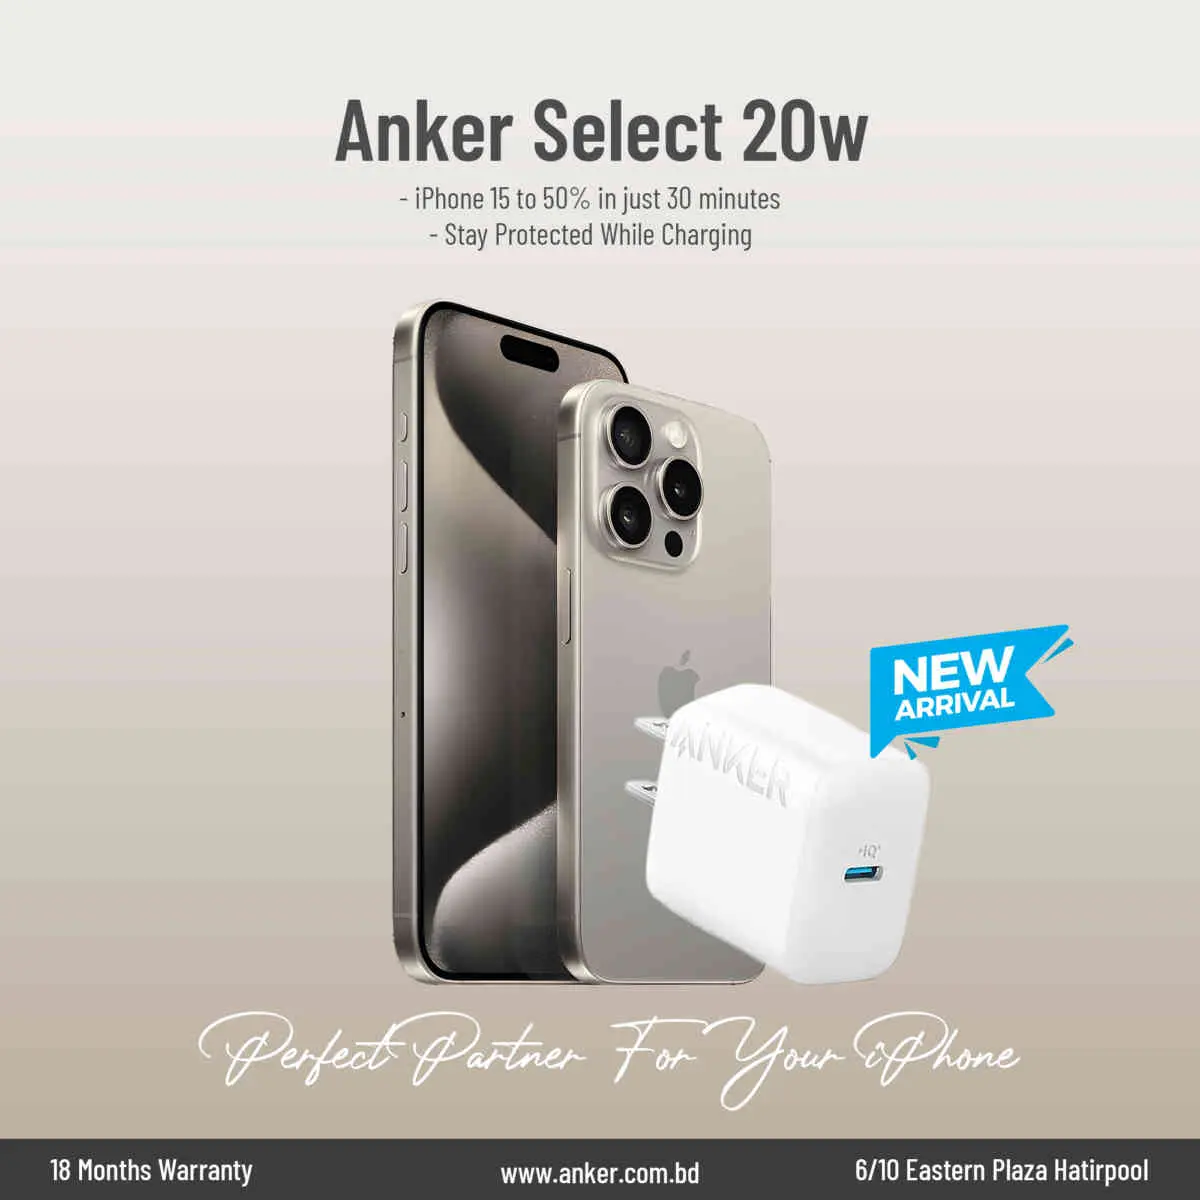 Anker Select 20w _ Deximpo International Limited